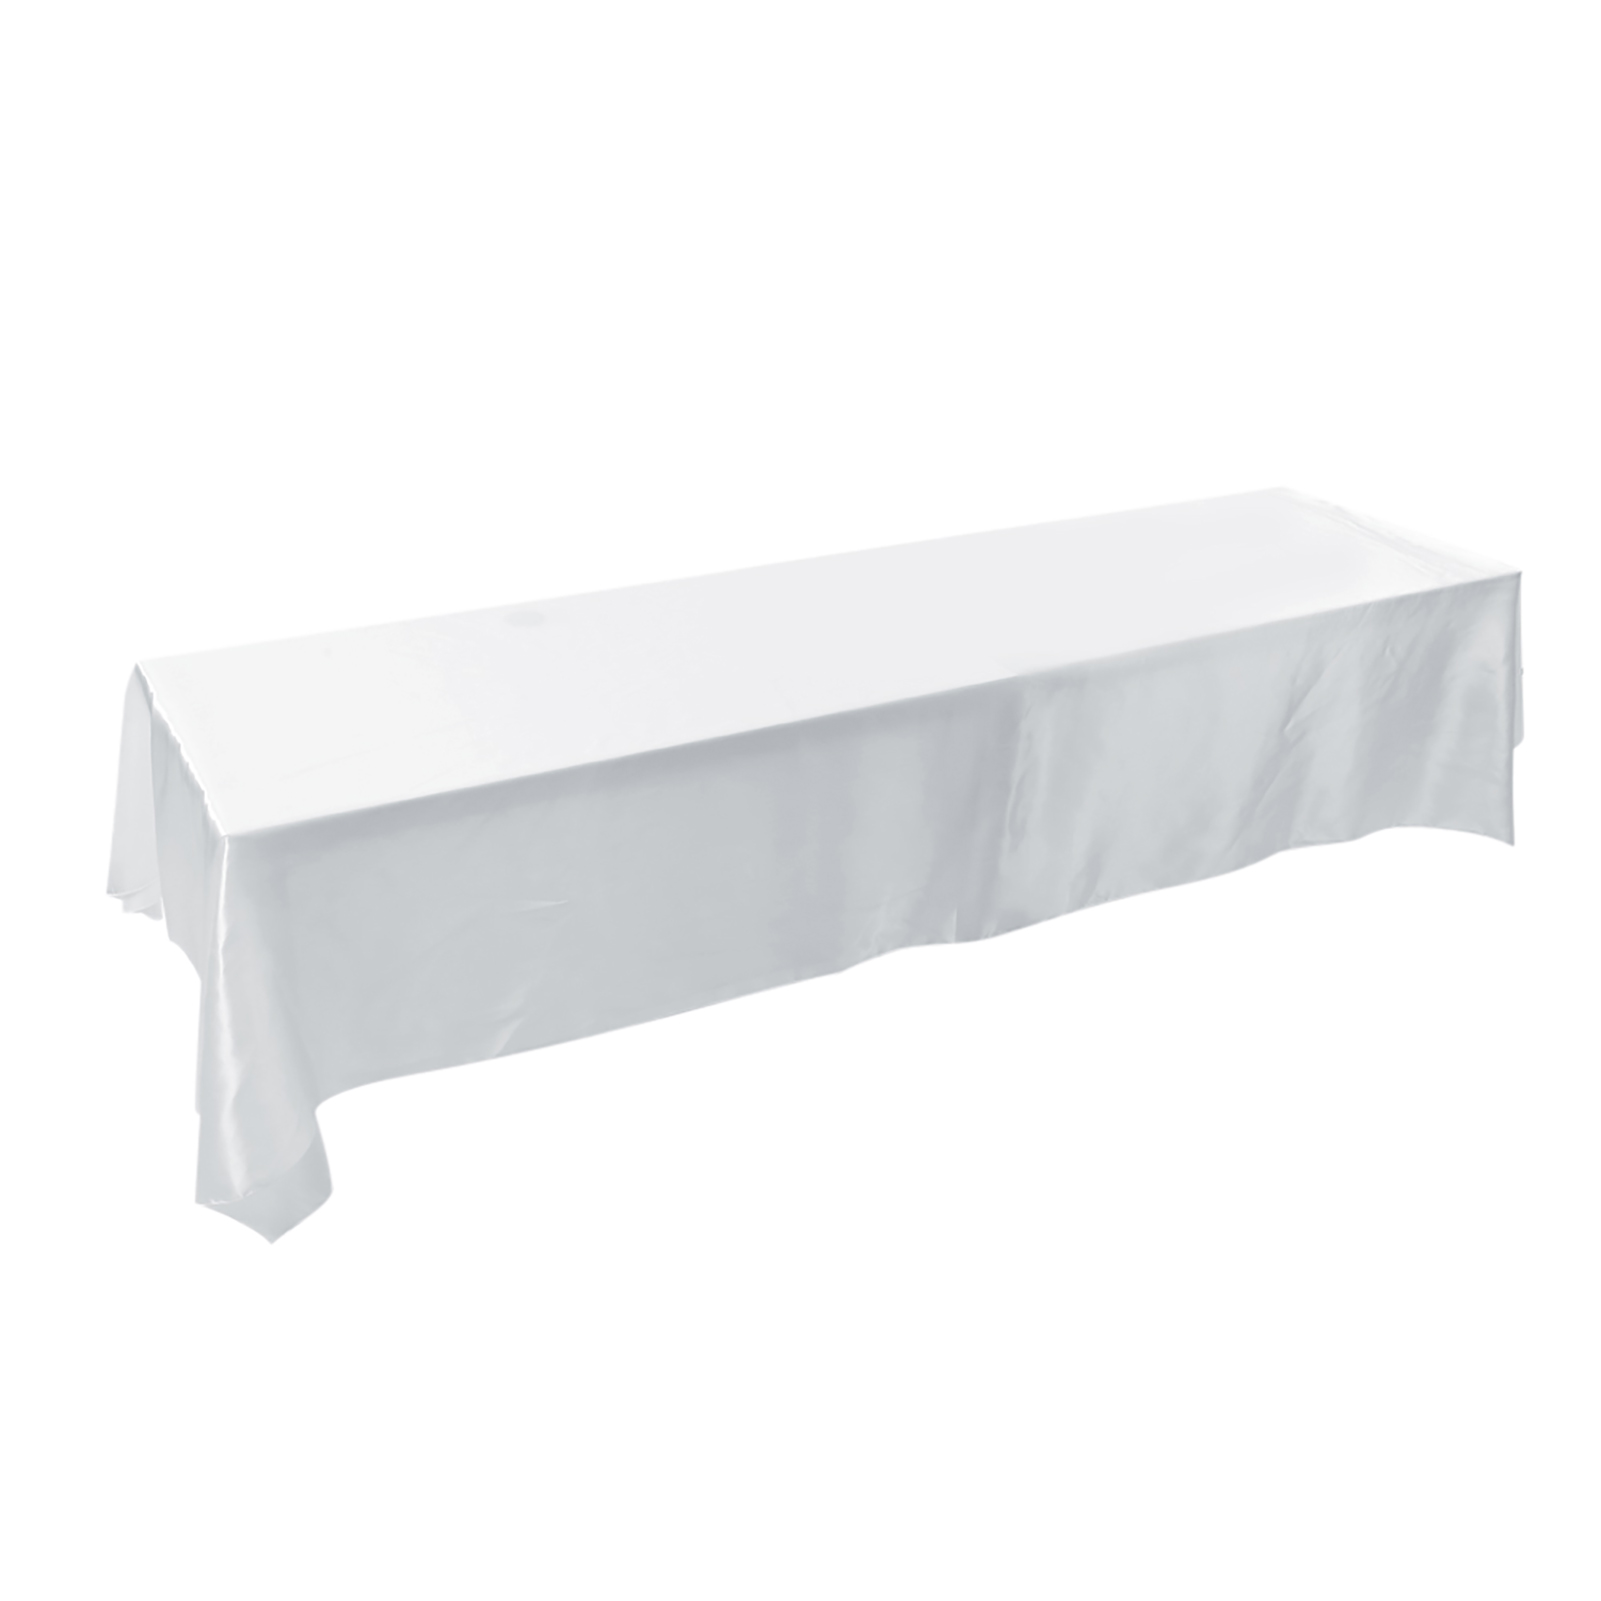 145x320cm Rectangle Tablecloth Table Cover Stain-resistant Banquet Wedding Party Decor White